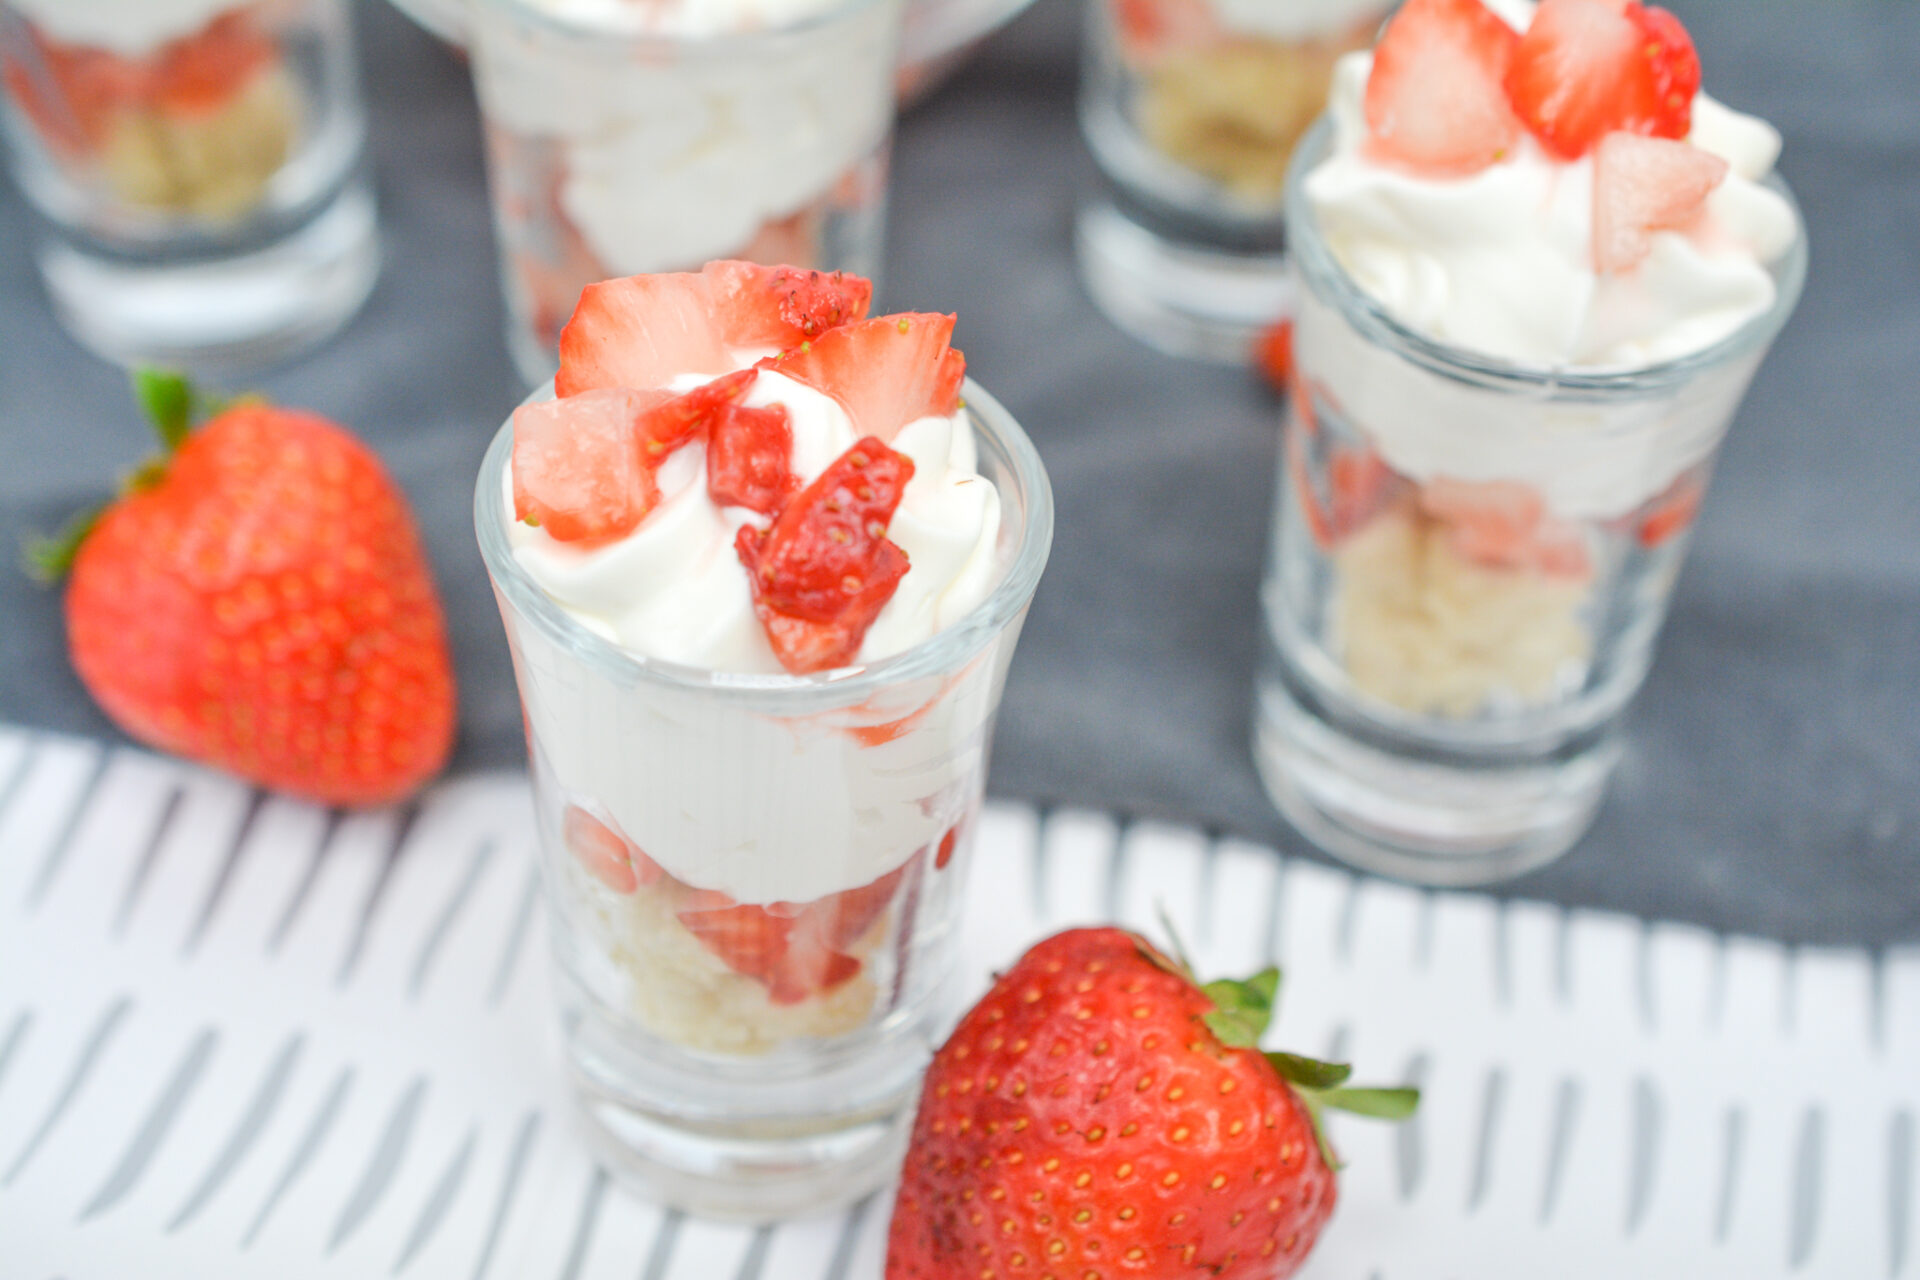 Strawberry Shortcake Shooters on a counter with strawberries.